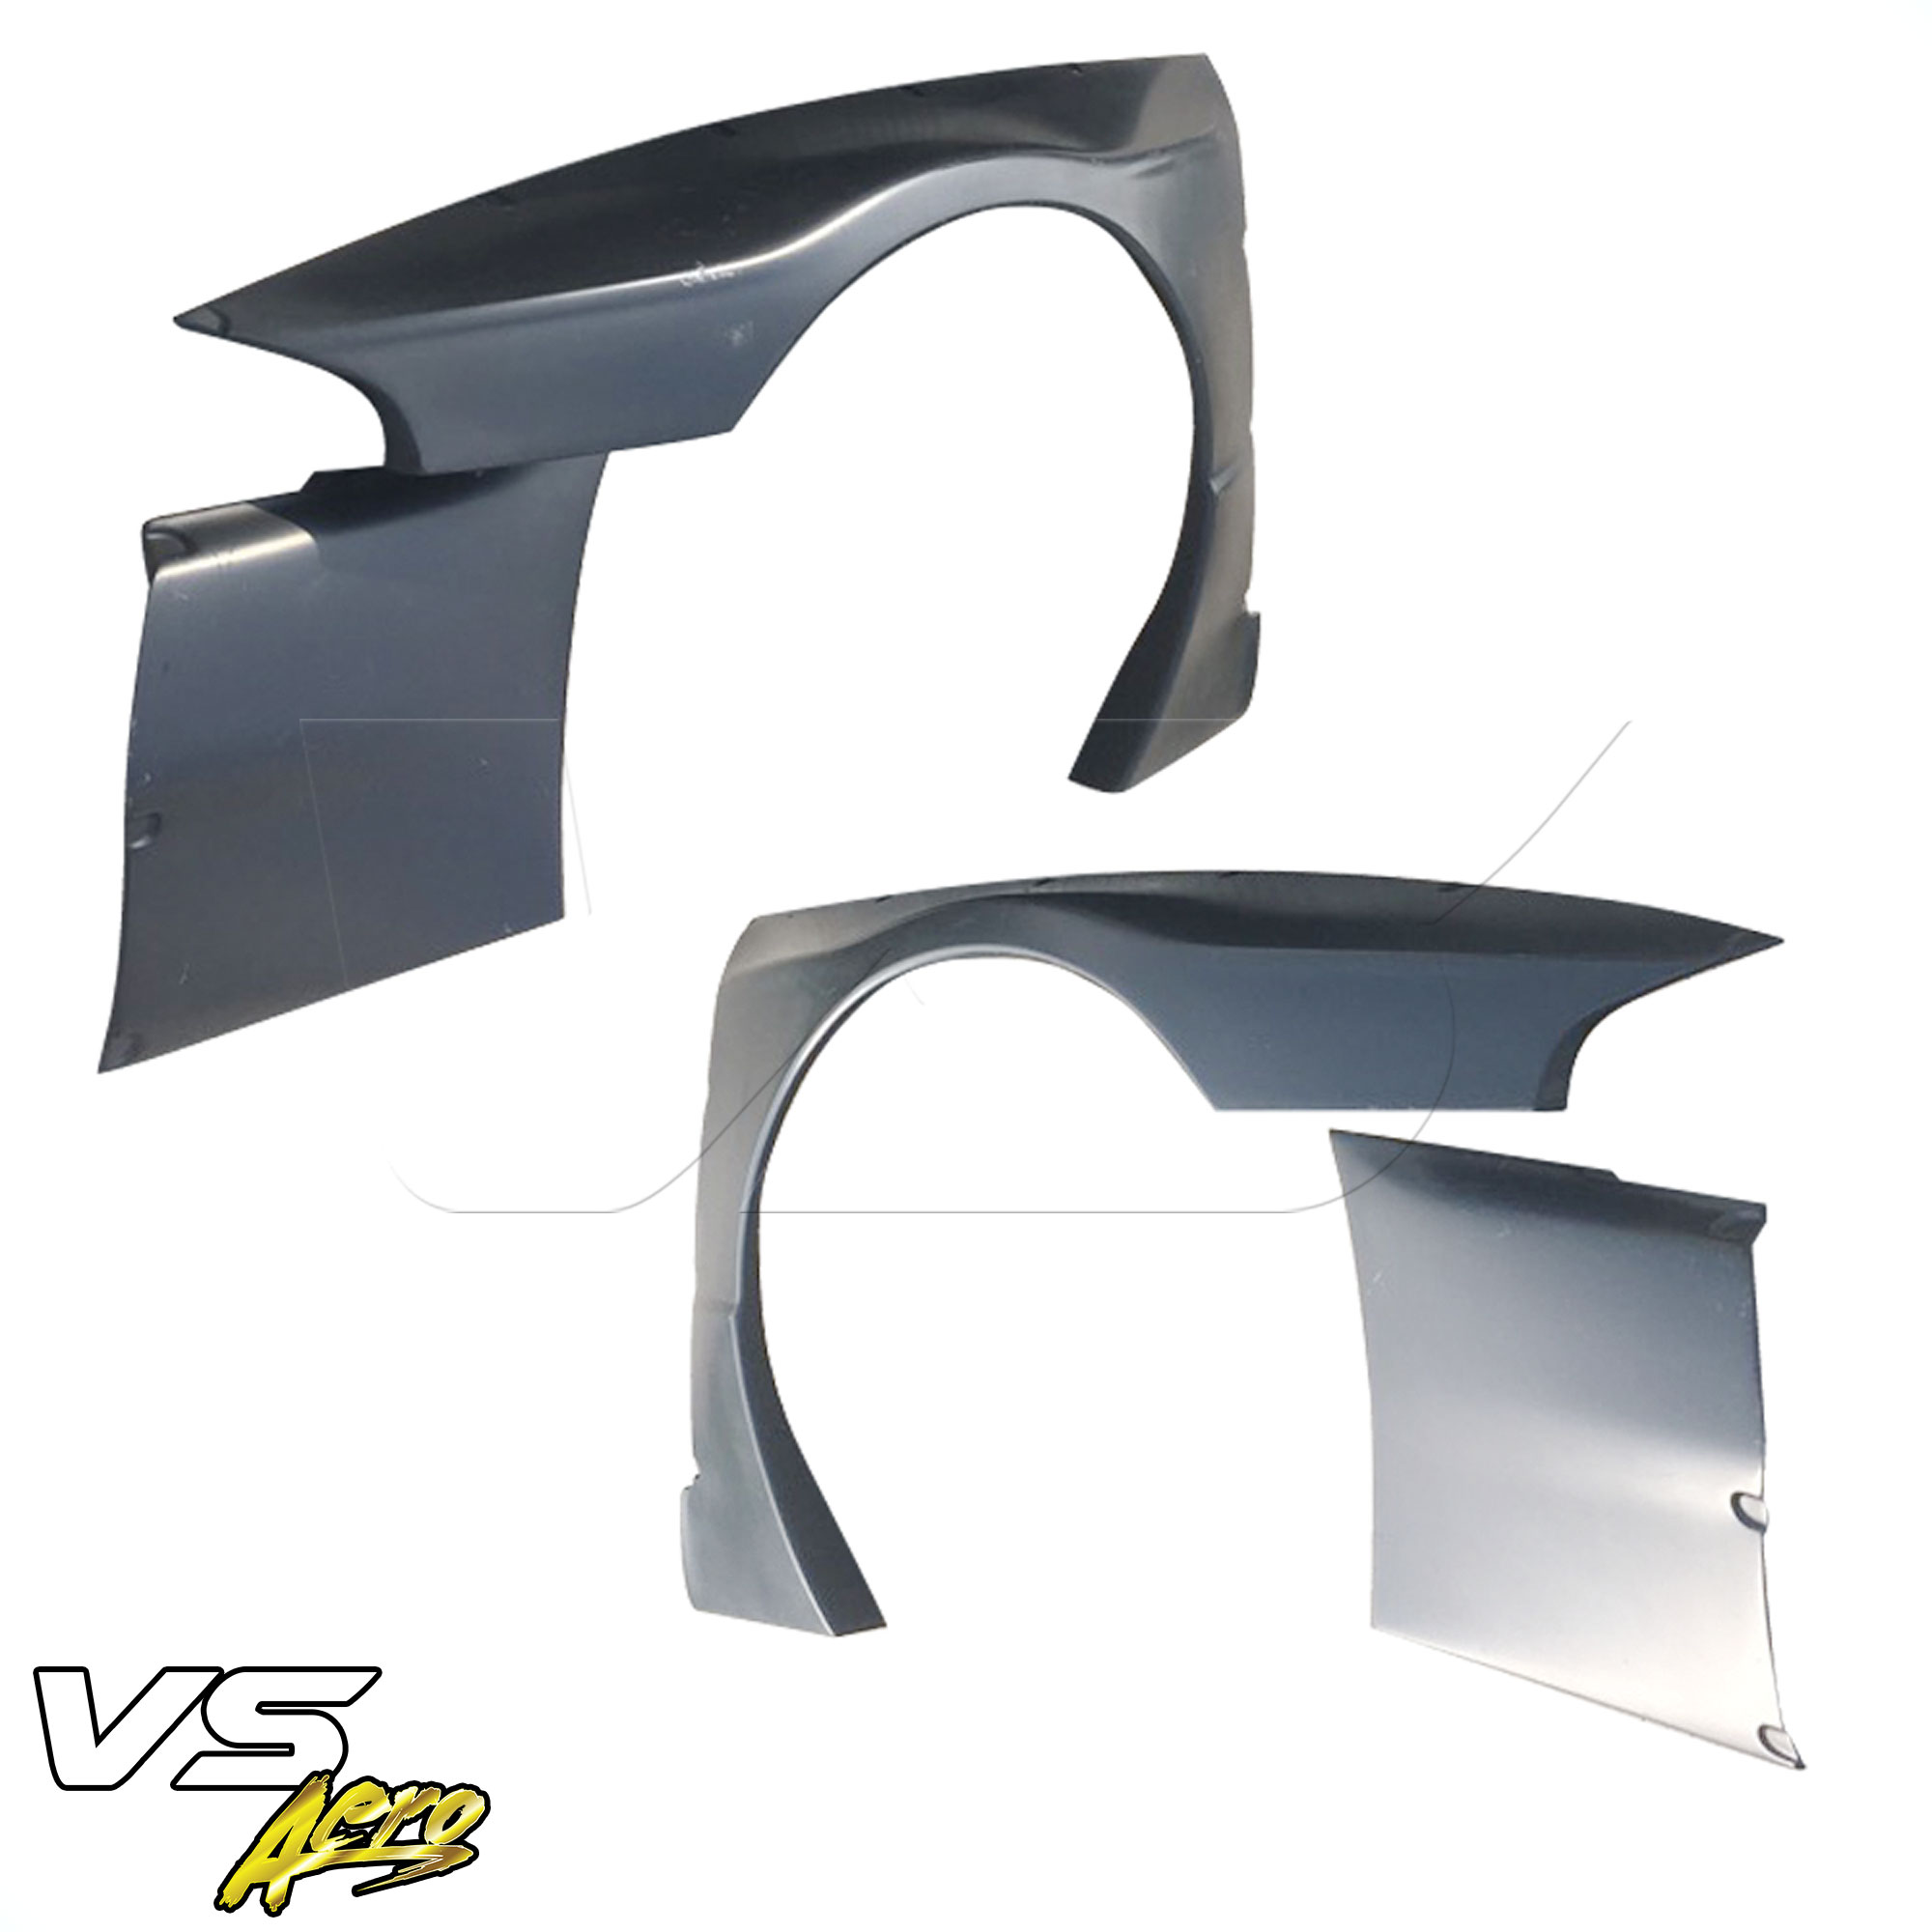 VSaero FRP TKYO Wide Body 40mm Fender Flares (front) 4pc > Nissan Skyline R32 1990-1994 > 2dr Coupe - Image 15